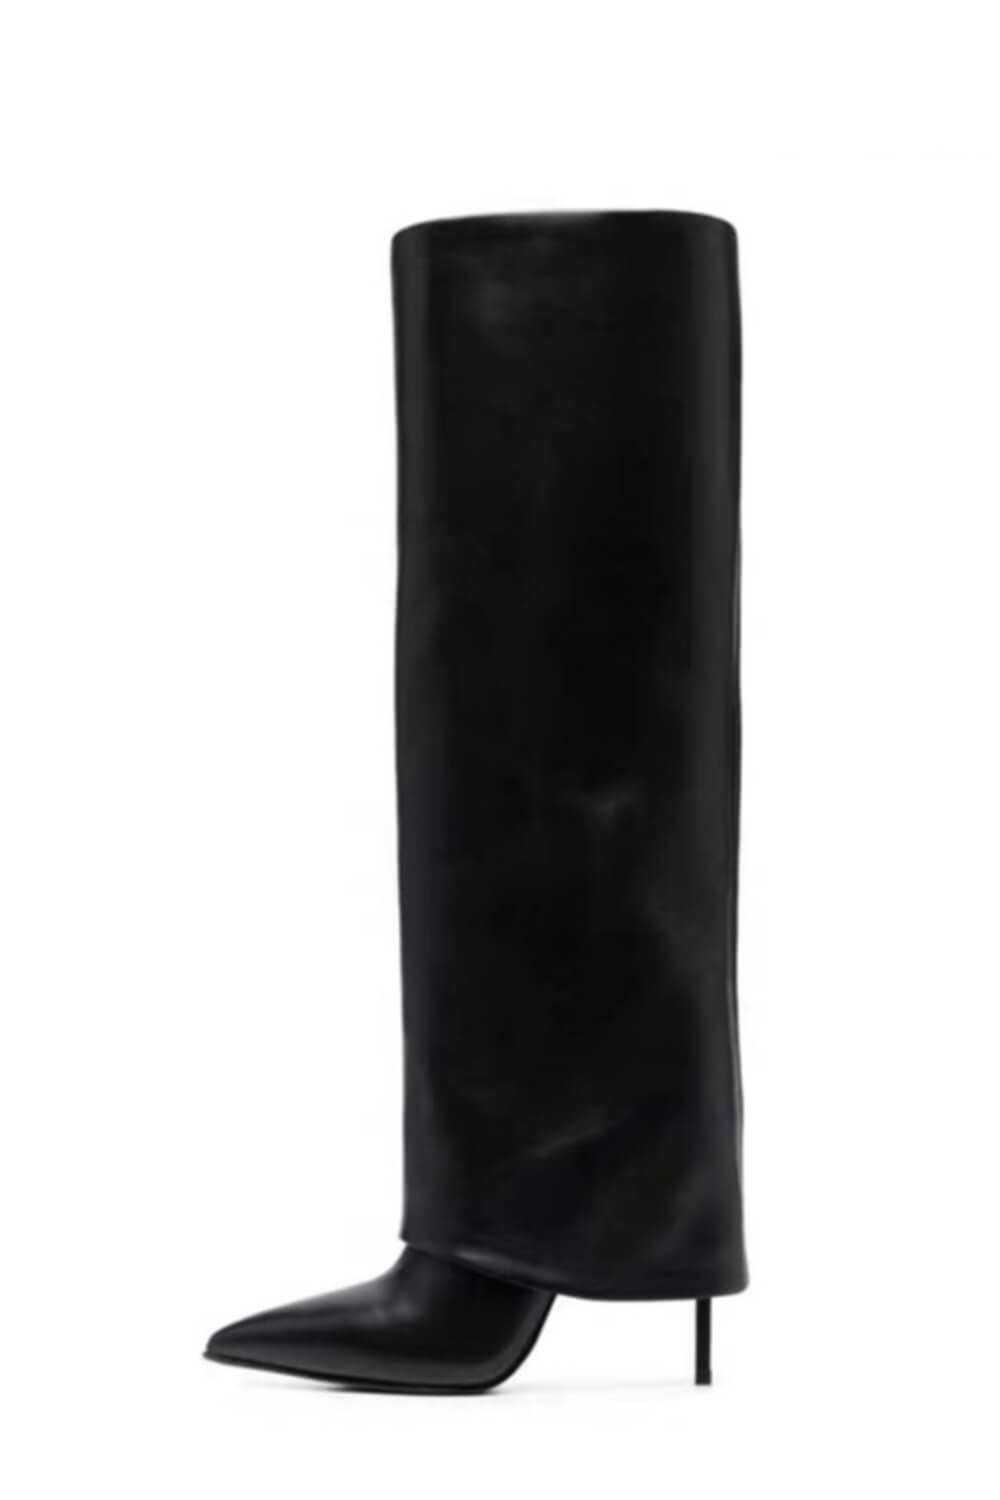 Black Faux Leather Folded Over Knee High Stiletto Heeled Boots